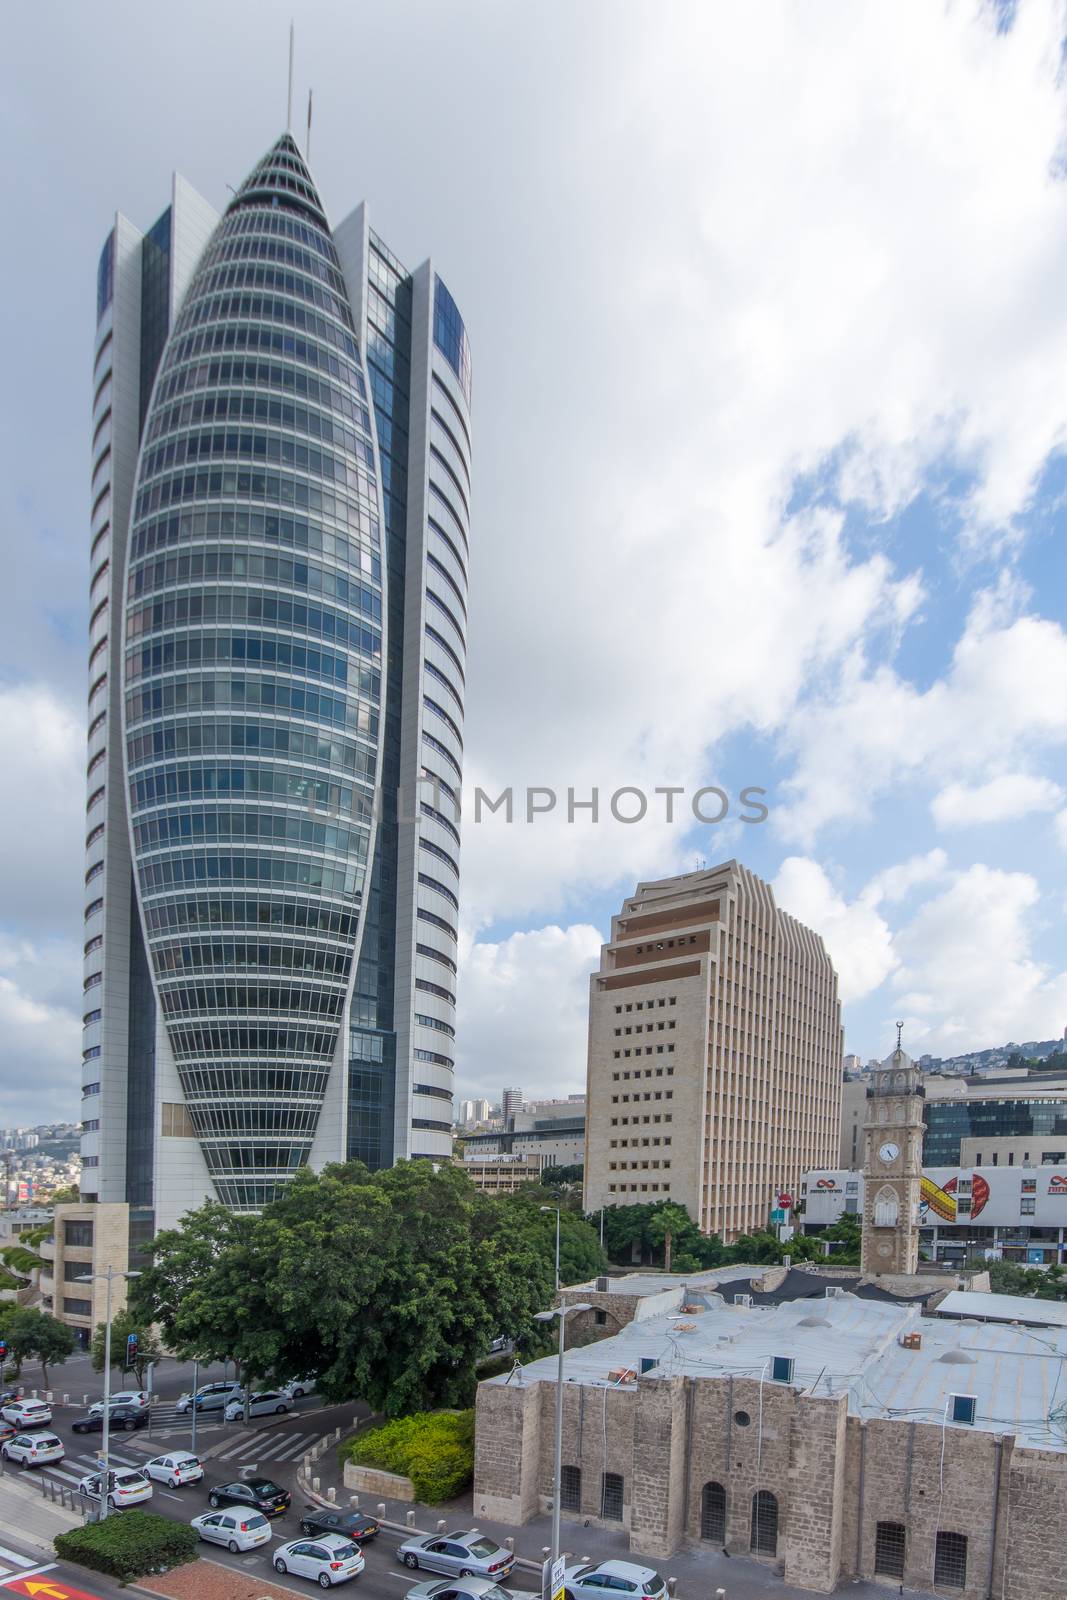 HAIFA, ISRAEL - JULY 19, 2018: View of various buildings in the downtown district of Haifa, Israel